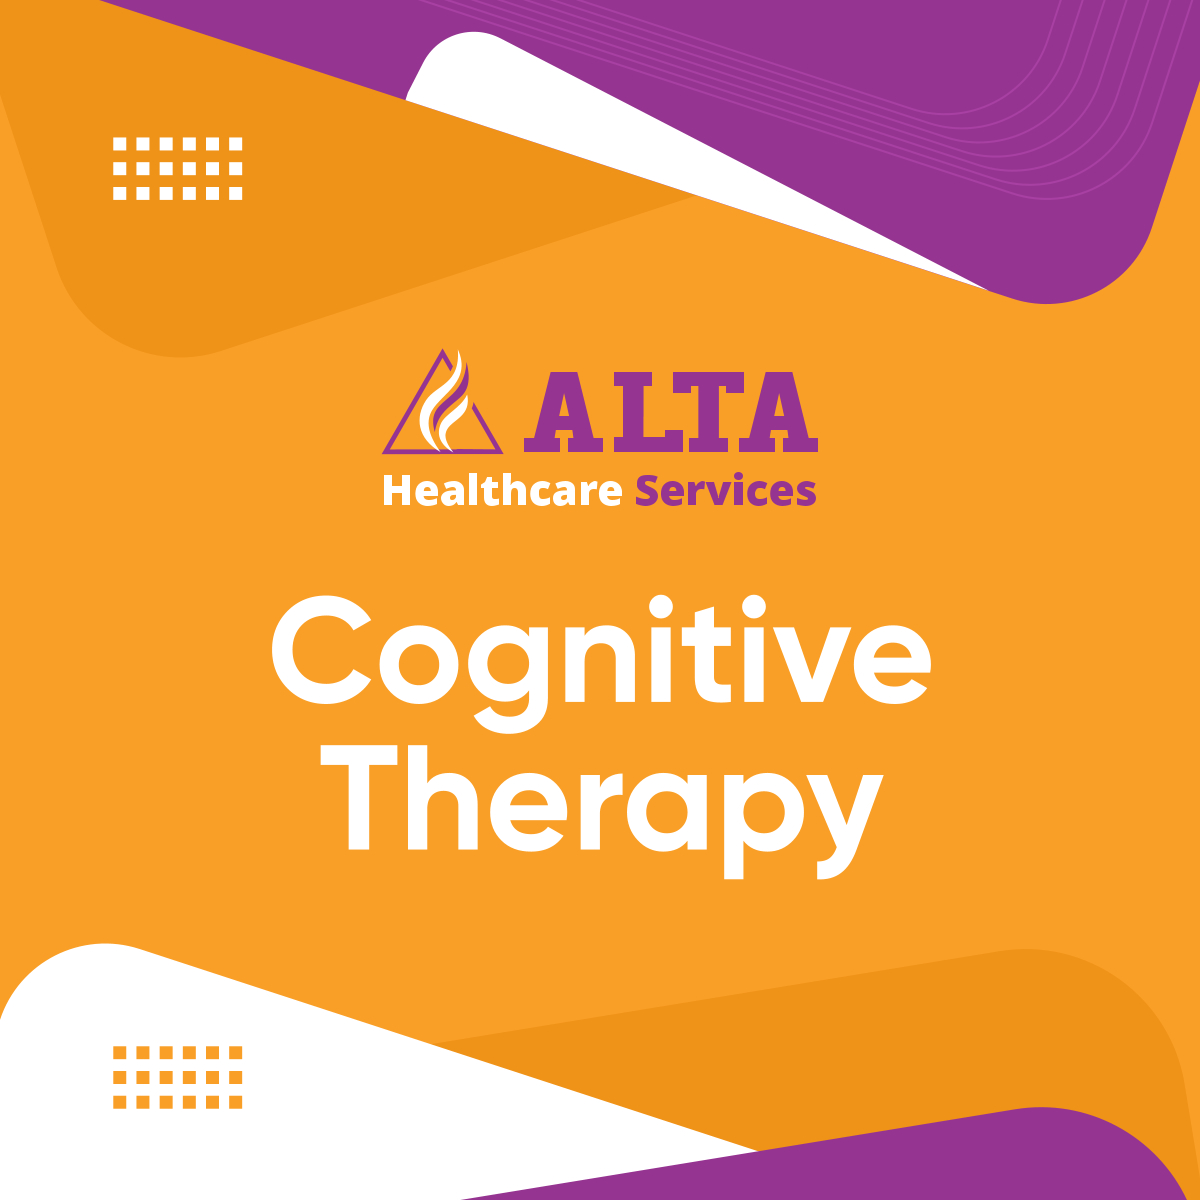 The goal of cognitive behavioral therapy is to aid in the development of teaching patients with specific techniques that reduce the symptoms of various mental health conditions. Cognitive behavioral therapy can help patients when medications cannot help them.

#CognitiveTherapy